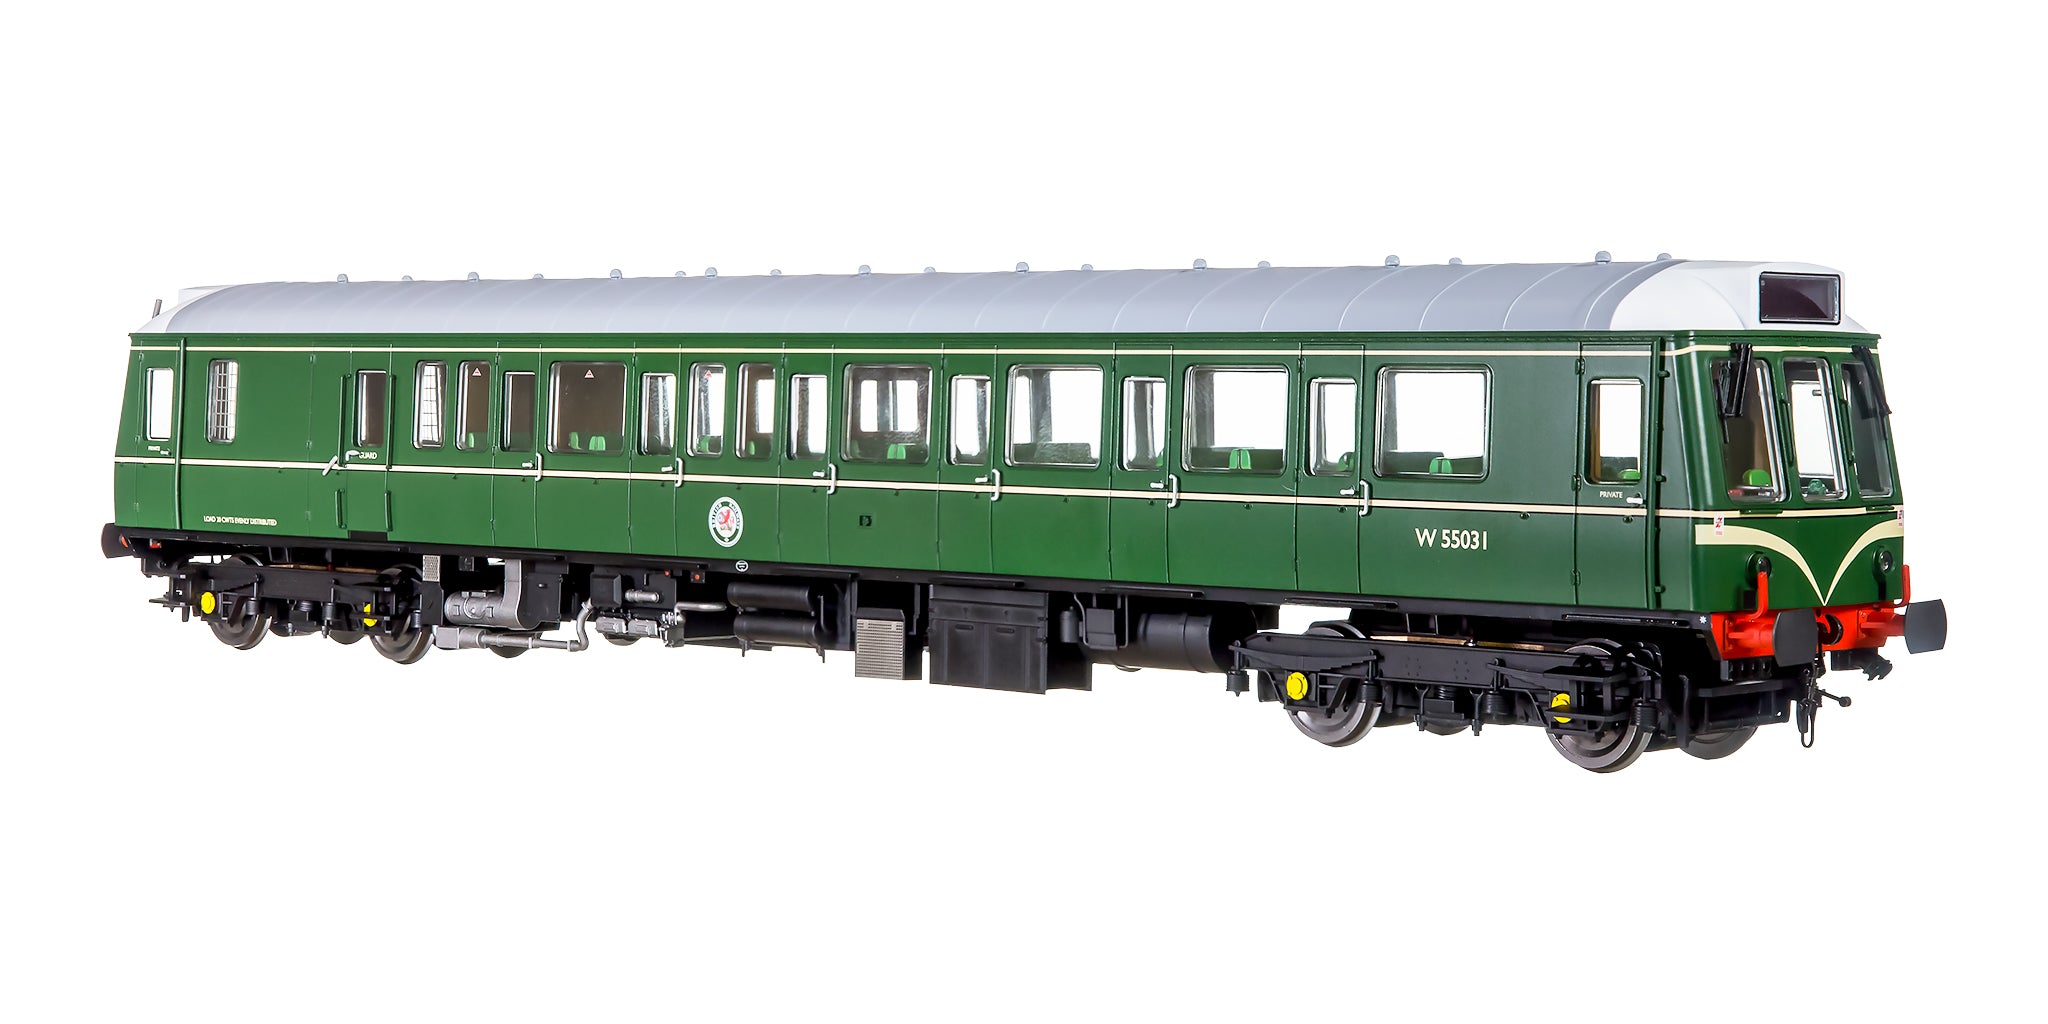 7D-009-006 O Gauge Class 121 55031 BR Green Speed Whiskers